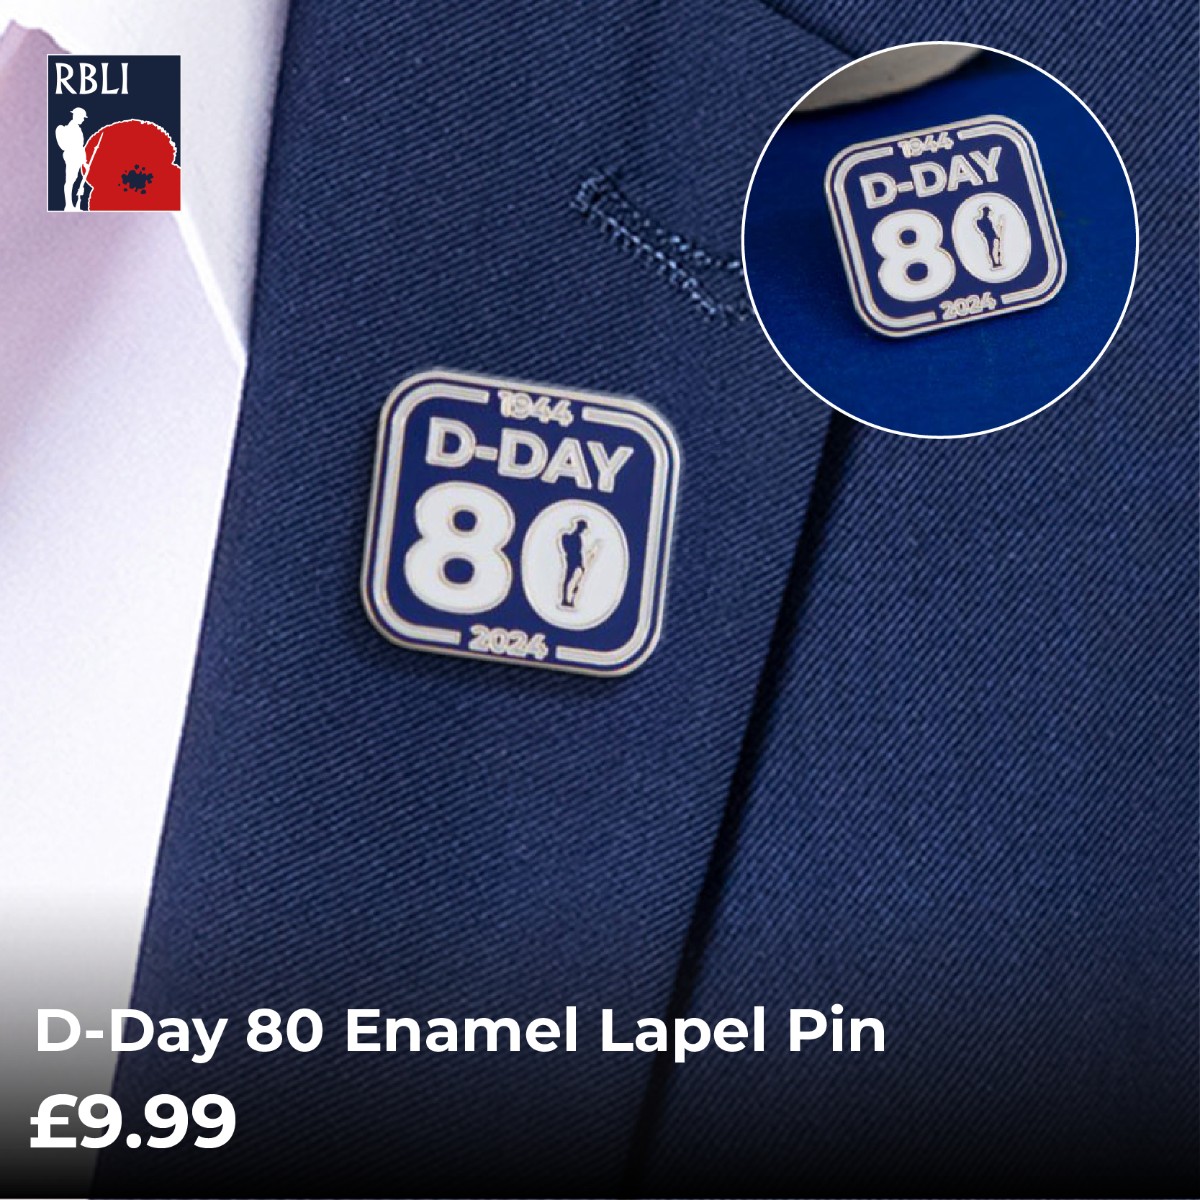 It’s been 80 years since British troops landed on the beaches of Normandy. Commemorate this poignant anniversary by shopping RBLI’s D-Day 80 range and support vulnerable veterans. Explore the full collection, including our Enamel Lapel Pin, here 👉: brnw.ch/21wJ0uw